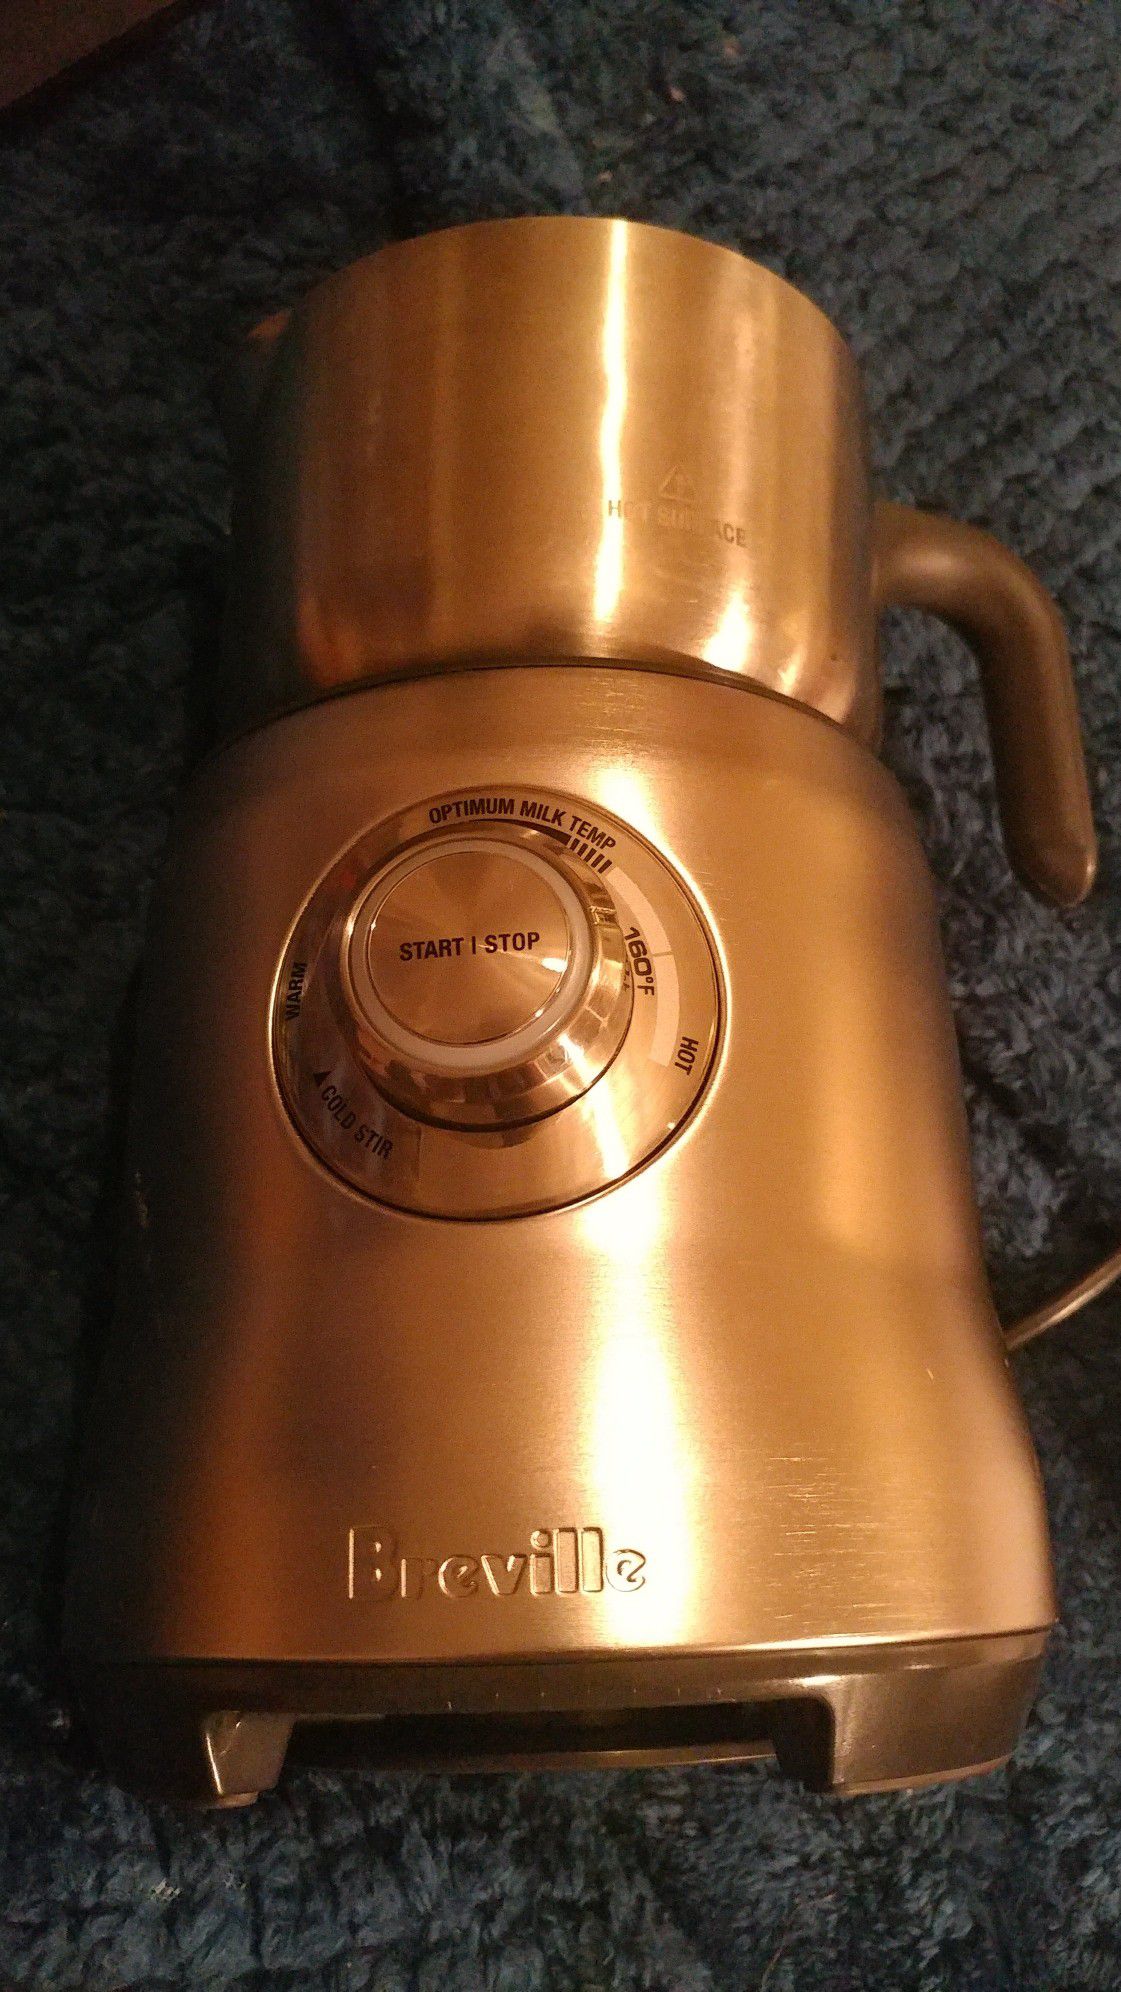 Breville milk cafe froth maker needs lid otherwise like new asking 70